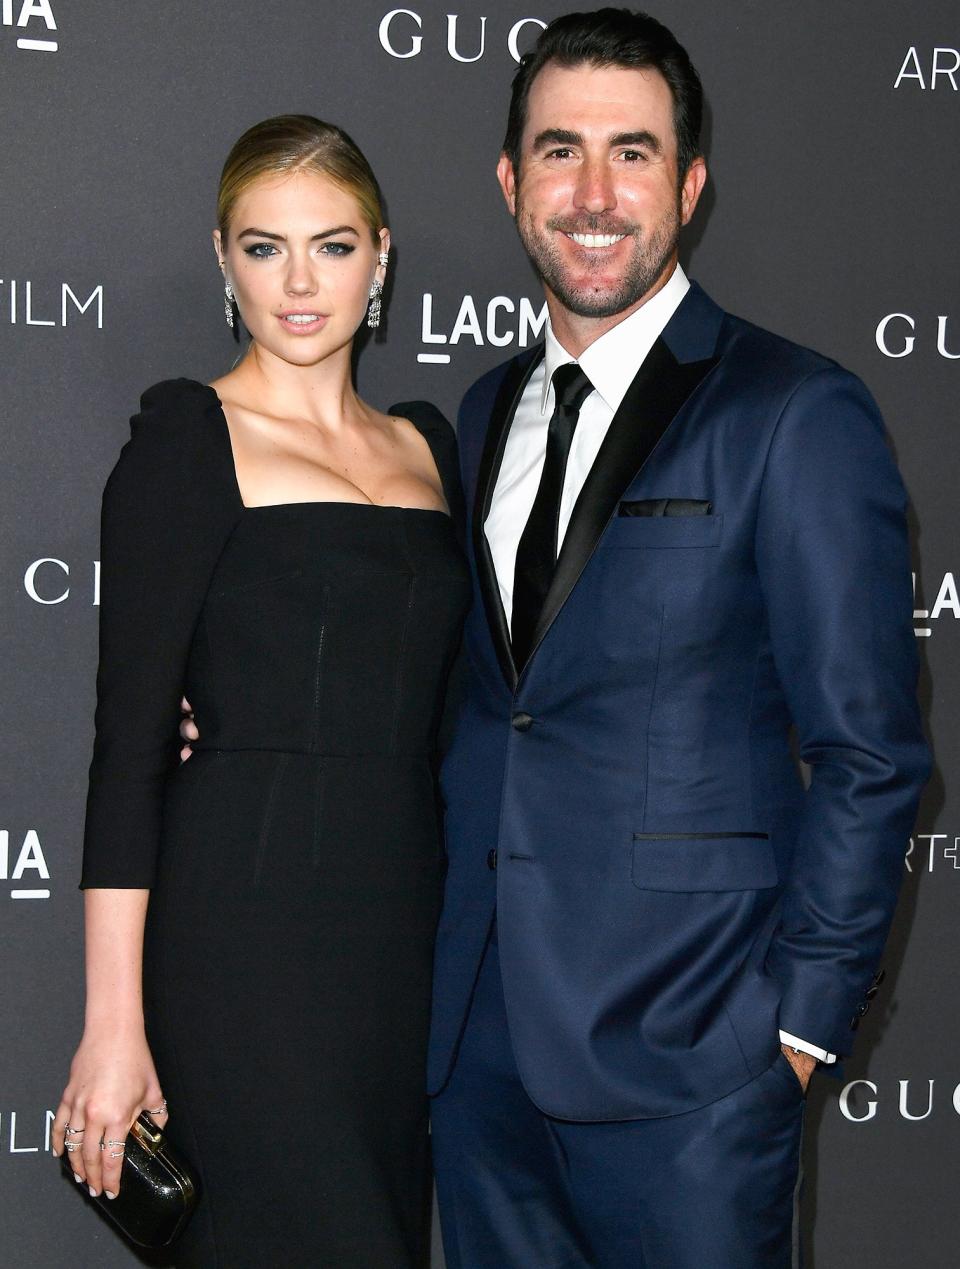 Want to Know If Kate Upton and Her Baseball Player Hubs Celebrate After a Win?